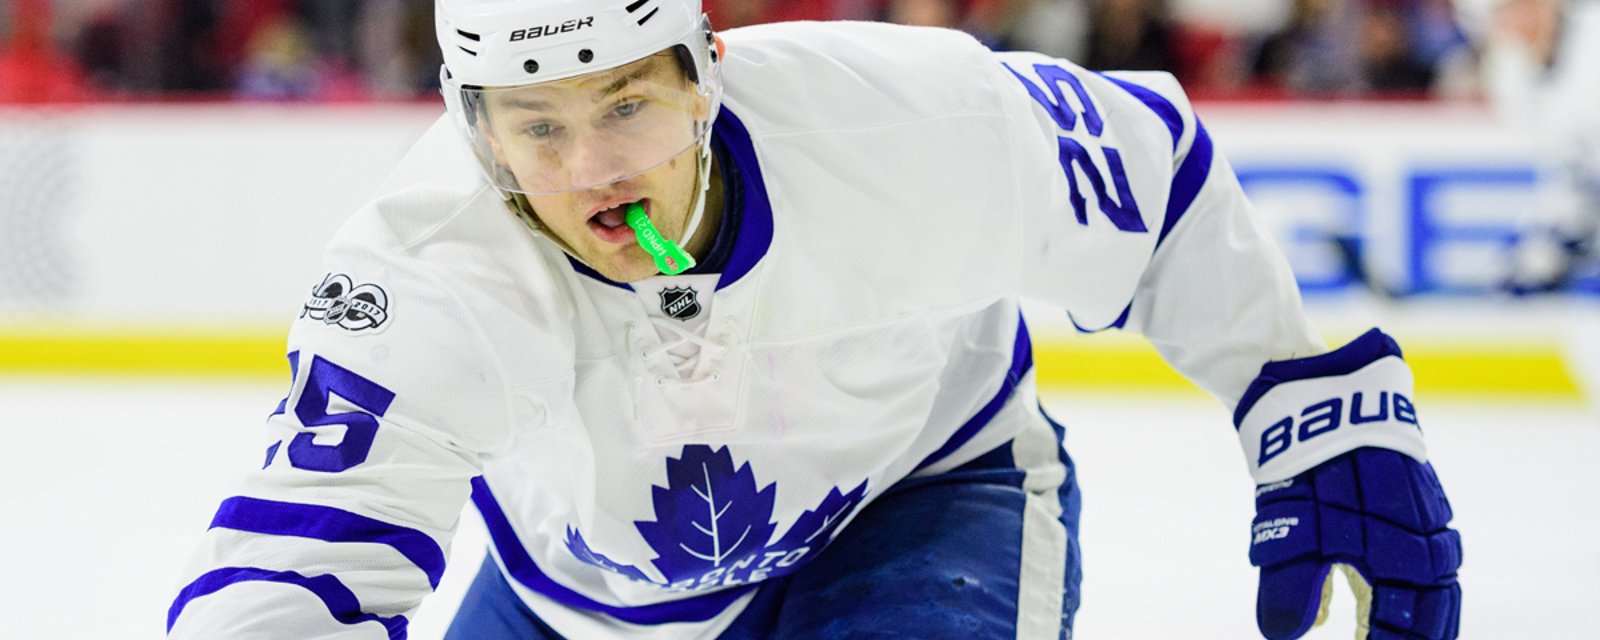 Breaking: JVR injury needs more attention